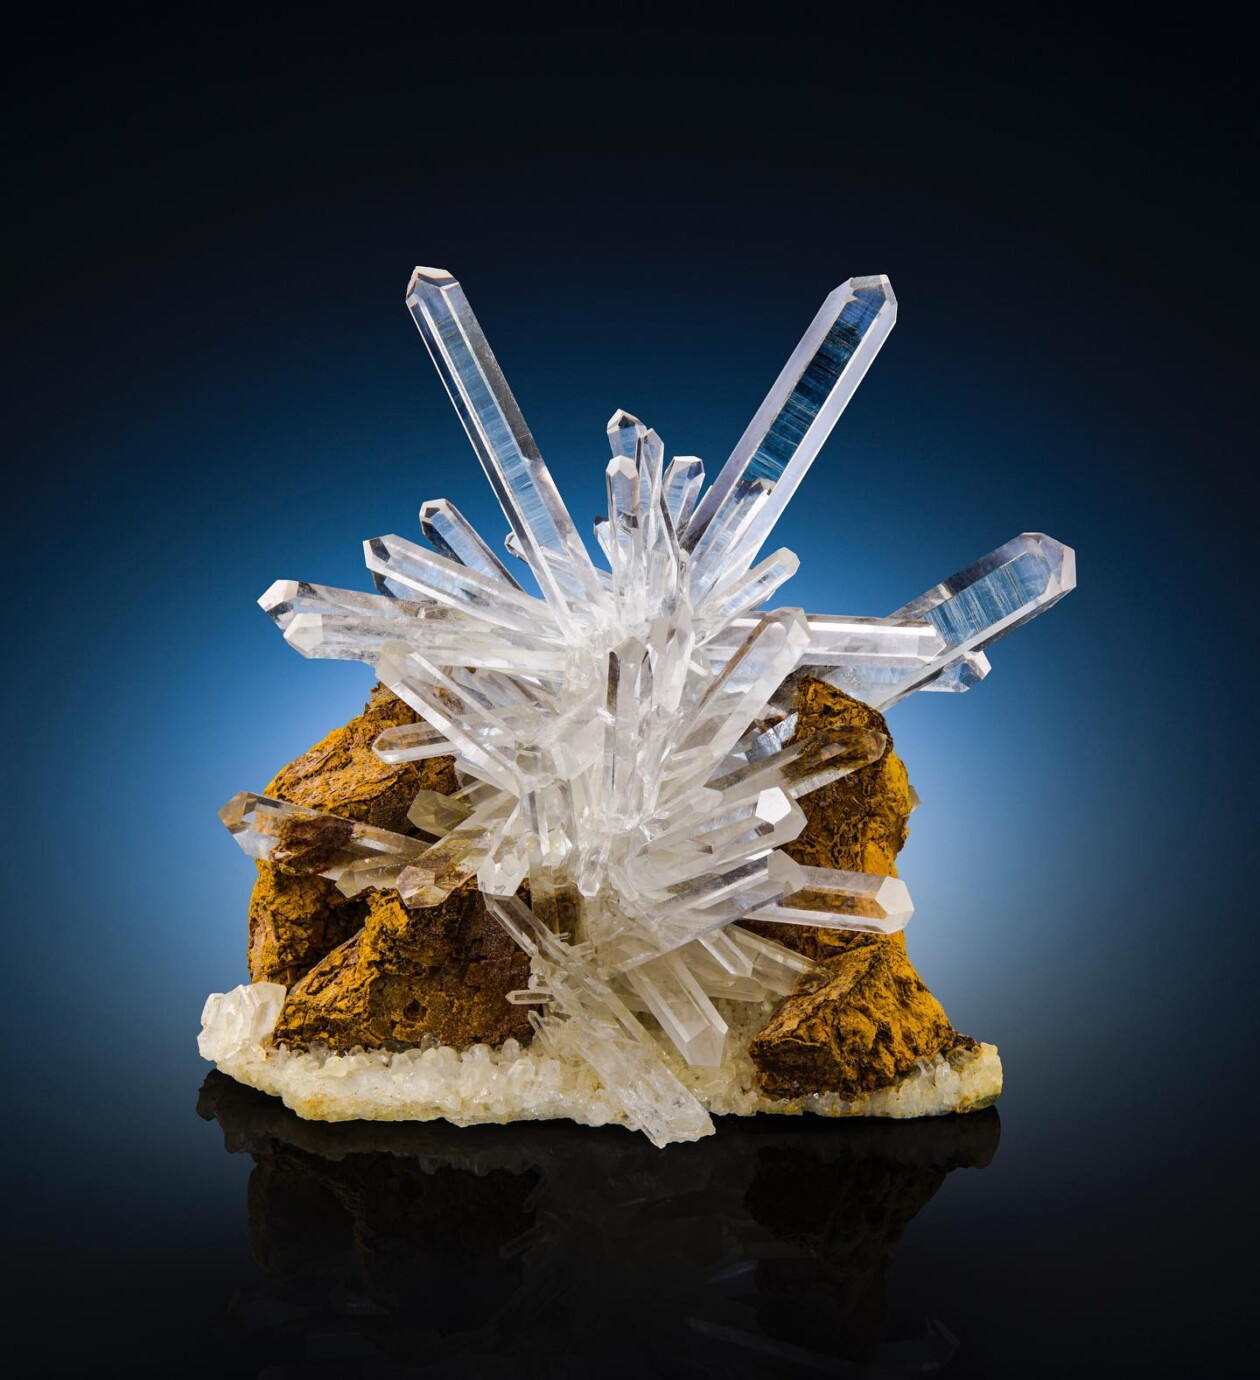 The Magnificent Mineral Photography Of Laszlo Kupi (3)